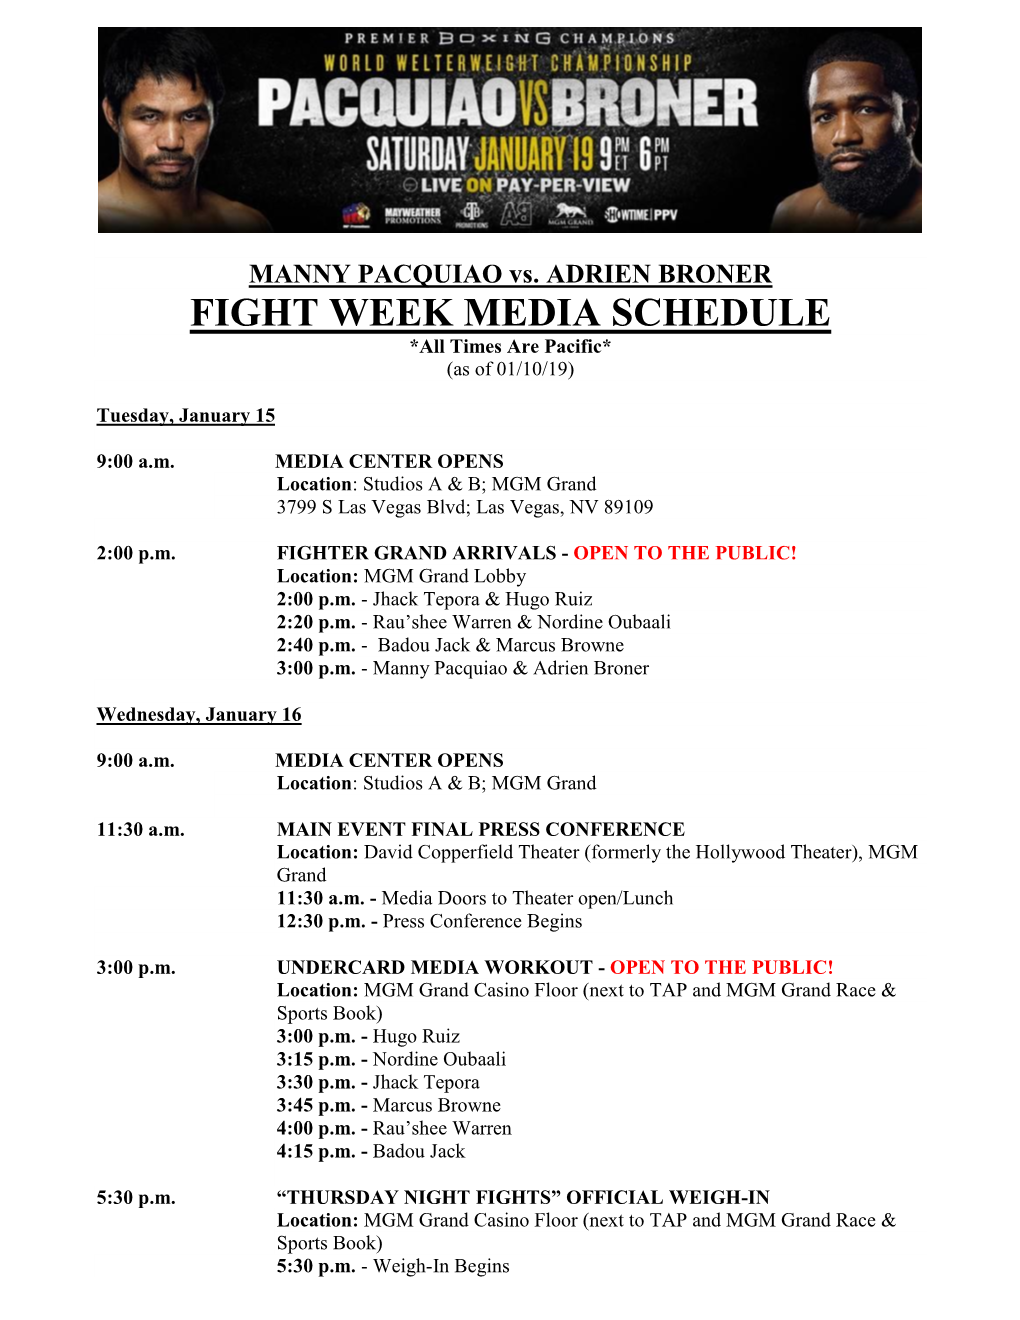 FIGHT WEEK MEDIA SCHEDULE *All Times Are Pacific* (As of 01/10/19)